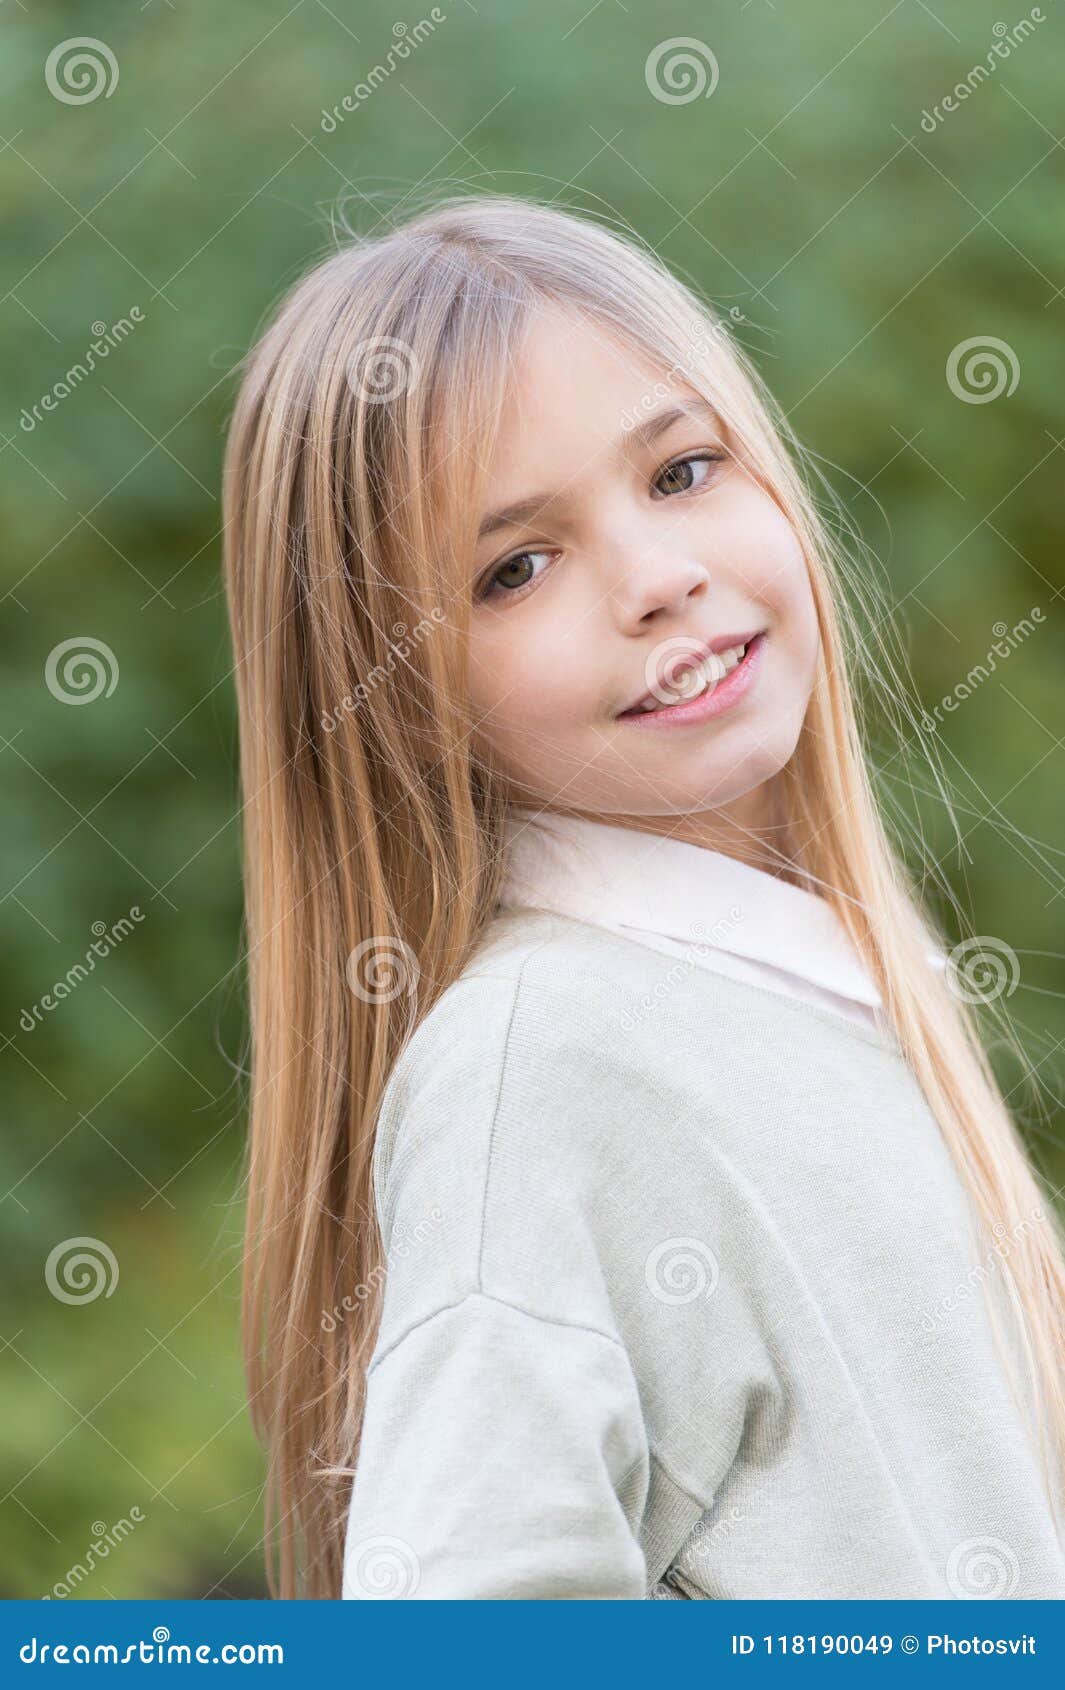 Little Girl Smile with Long Blond Hair. Child with Cute Face Outdoor.  Beauty Kid with Fresh Look and Skin Stock Image - Image of healthy, cute:  118190049